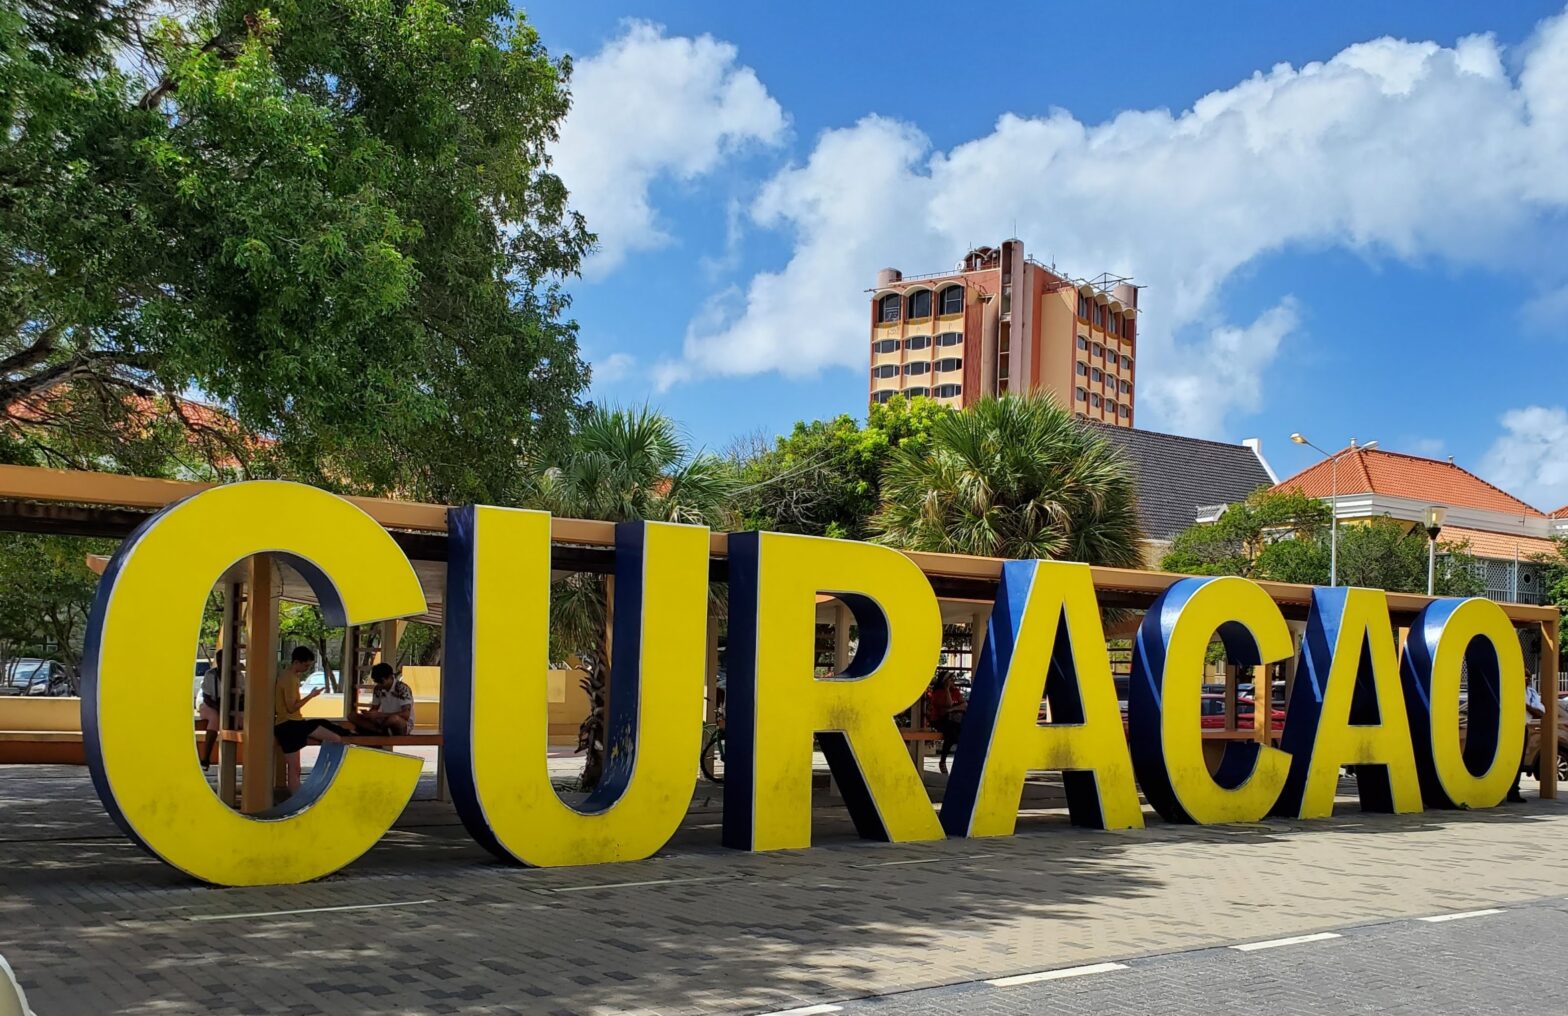 Is Curaçao Safe? A Guide to the Dutch-Caribbean Island